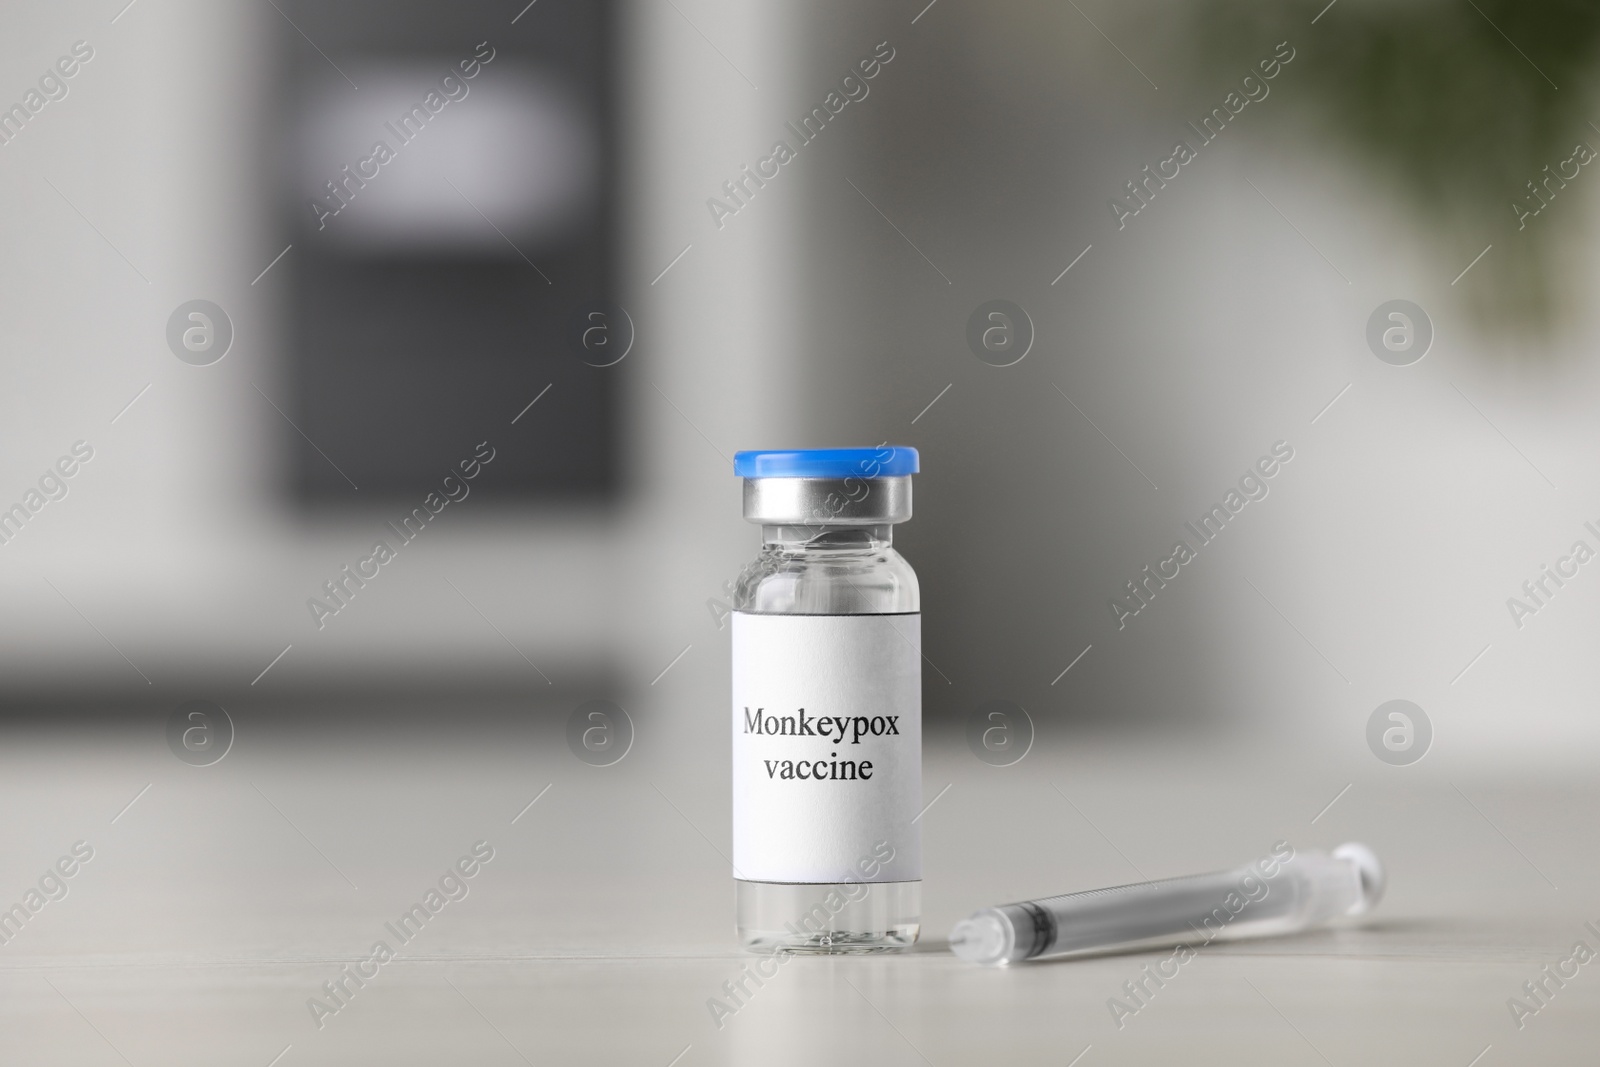 Photo of Monkeypox vaccine in vial and syringe on table